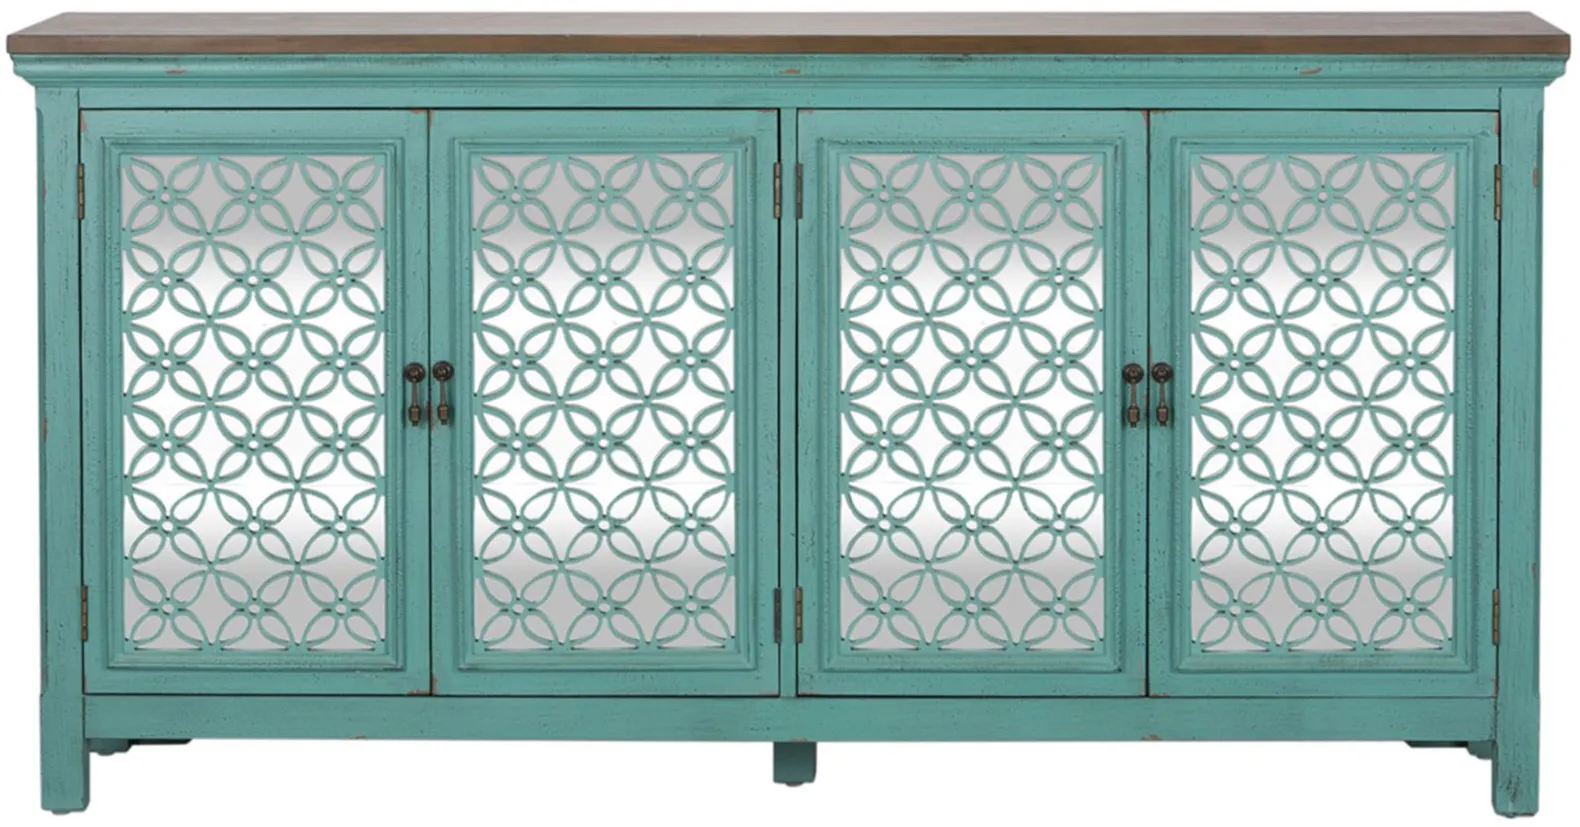 Kensington Accent Credenza in Blue by Liberty Furniture